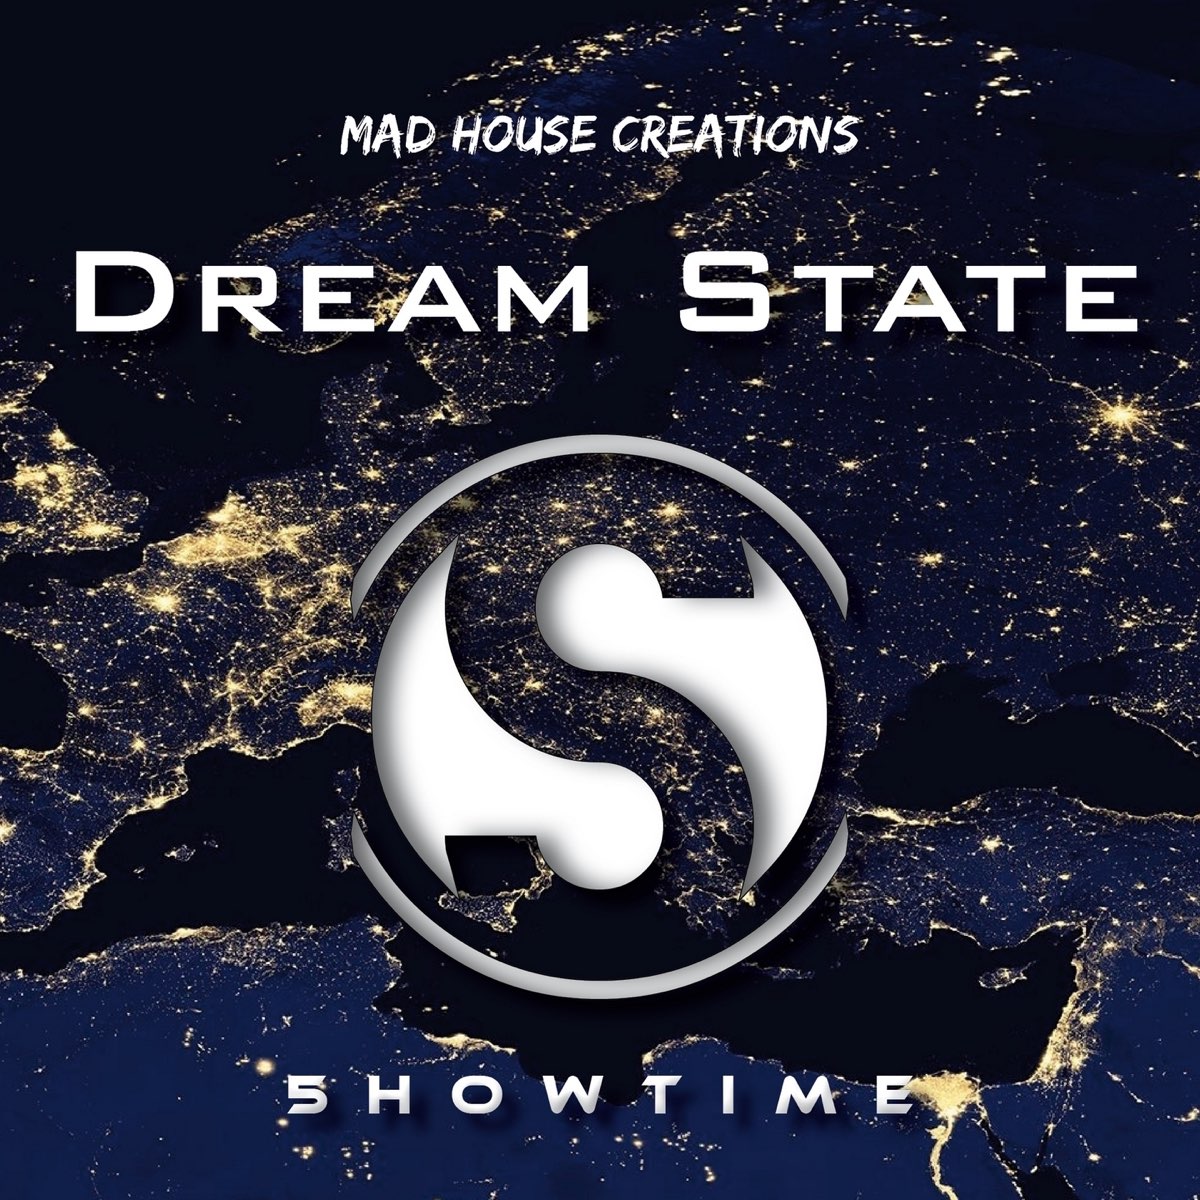 Dream State. Creations музыка. Dream State - Burden. Dream State - Monsters.